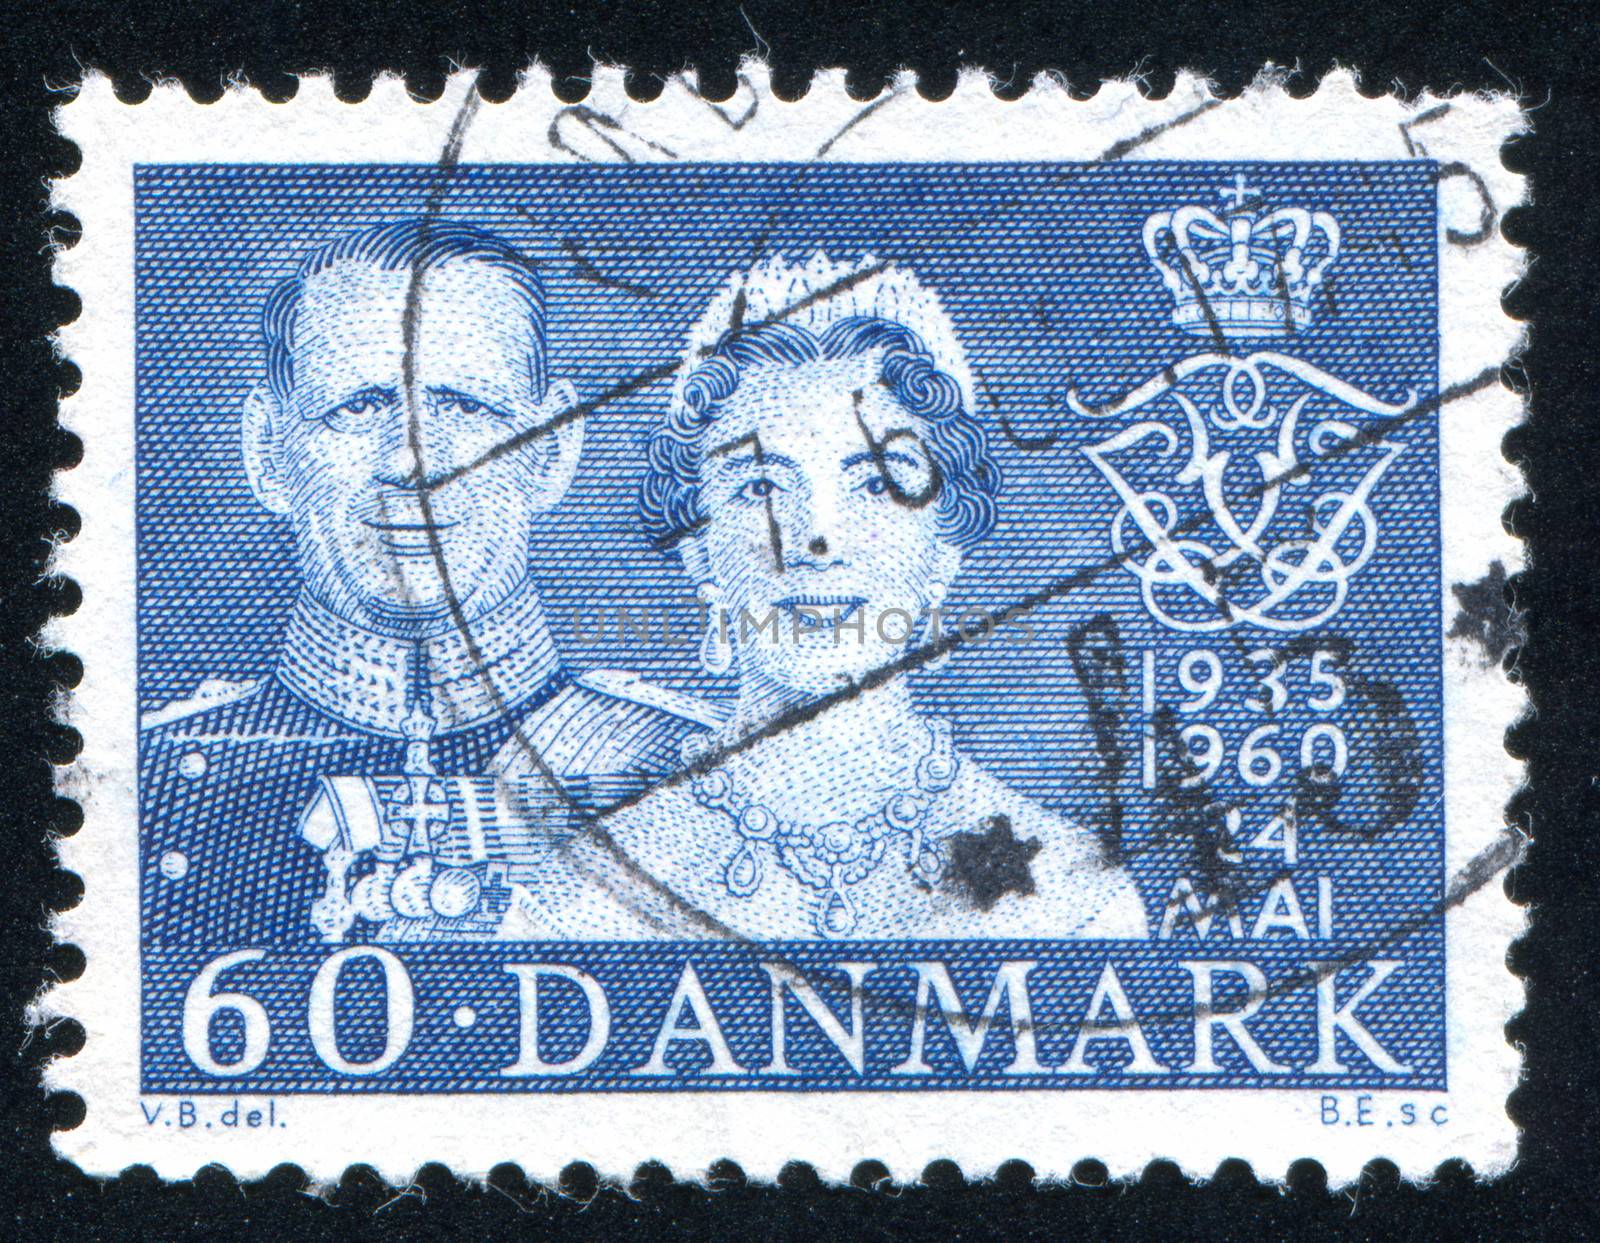 King Frederik IX and Queen Ingrid by rook